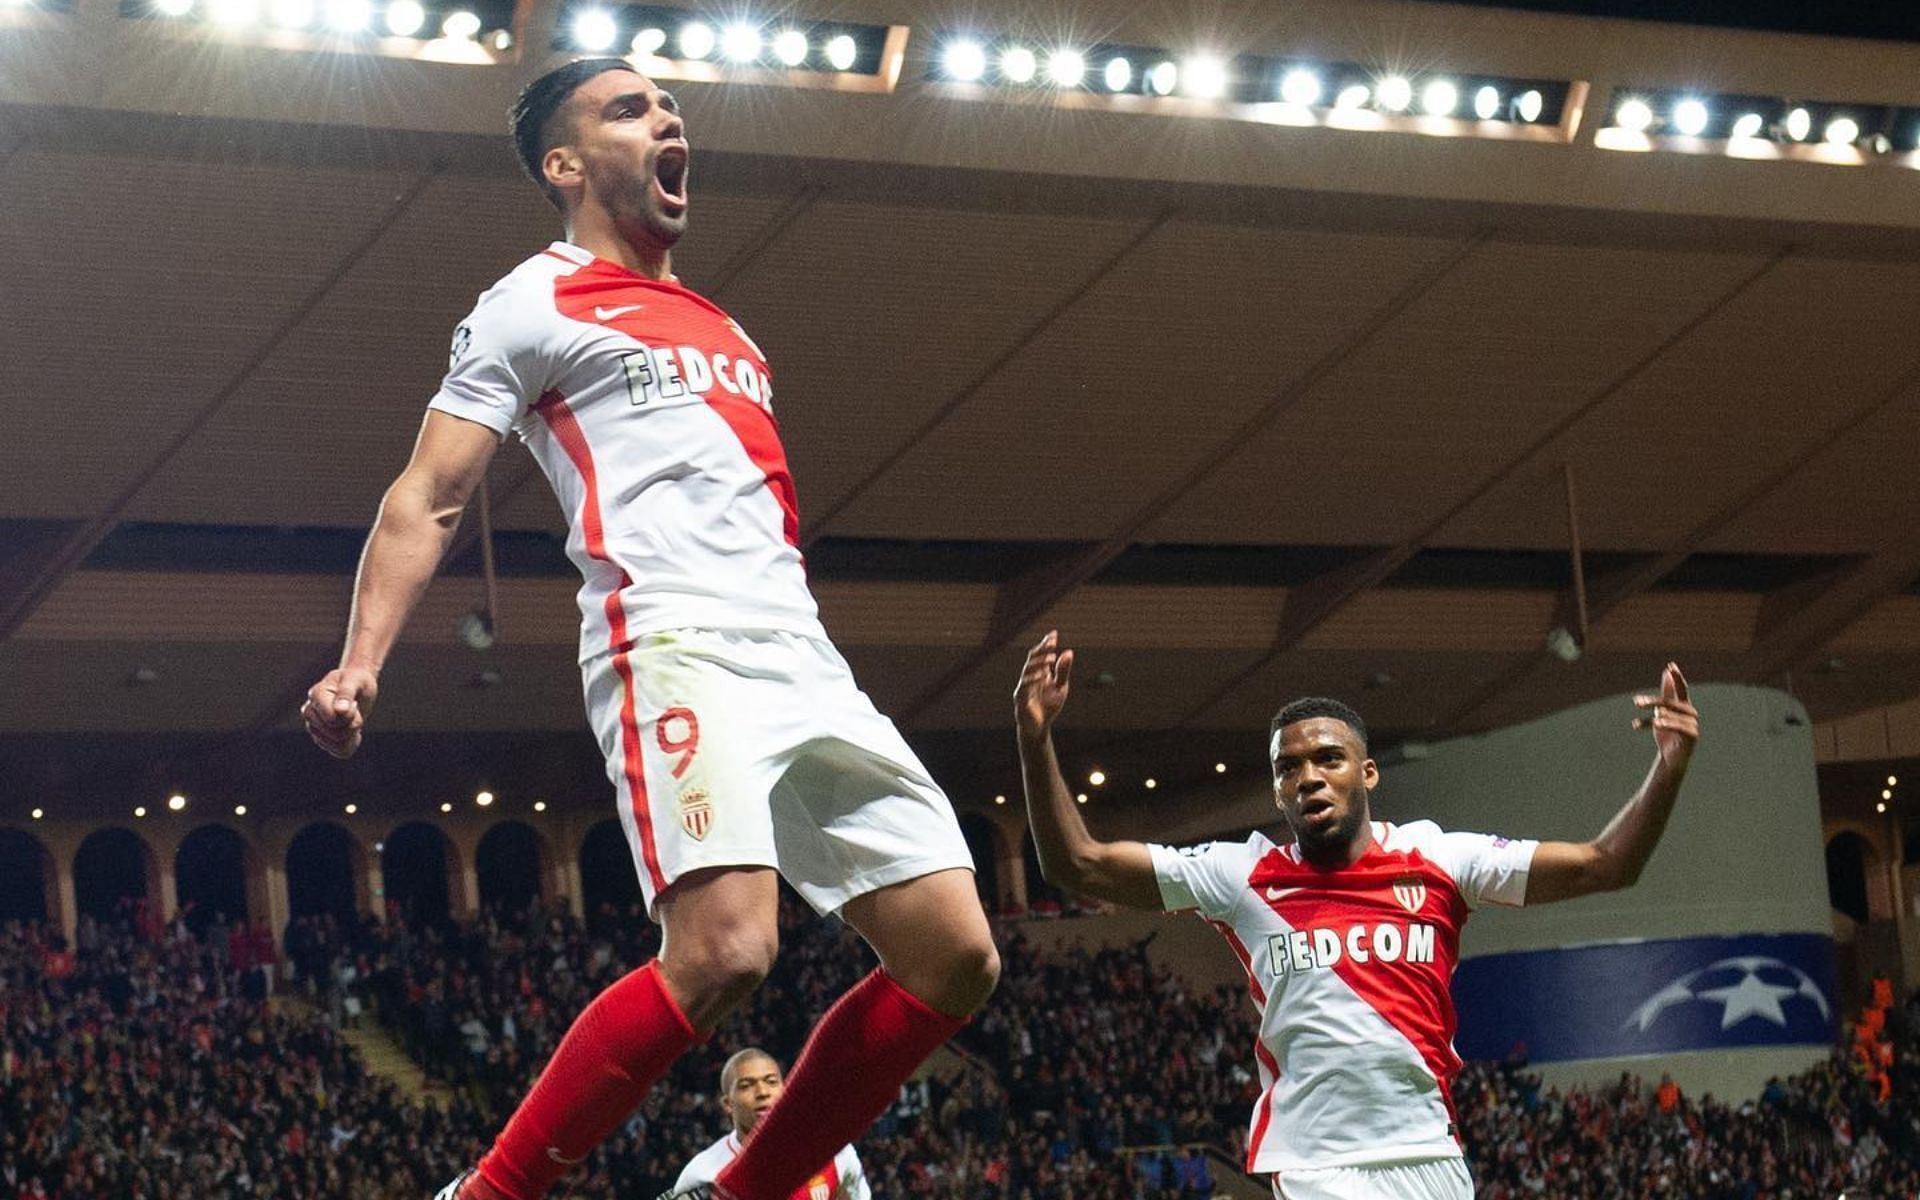 Can Monaco come out on top against fellow high-flyers Brest this weekend?